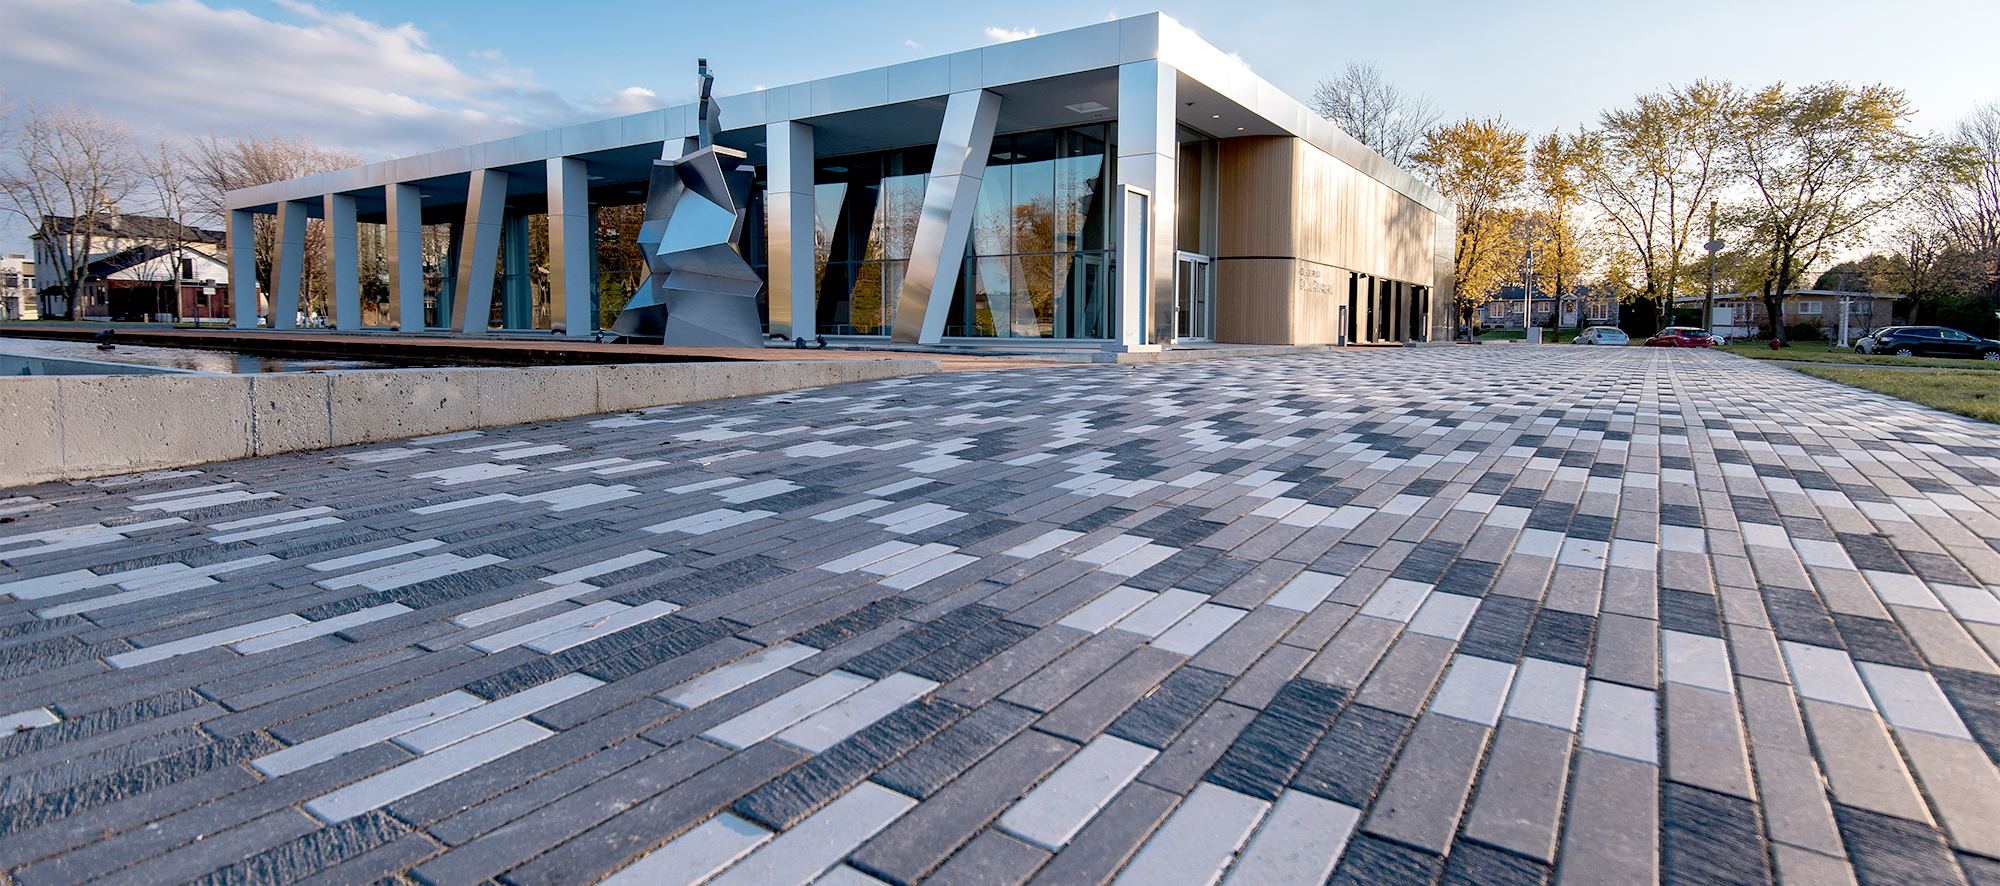 The textures of Il Campo pavers shine under the light of the sun, with a stunning art piece on display outside the building entrance.